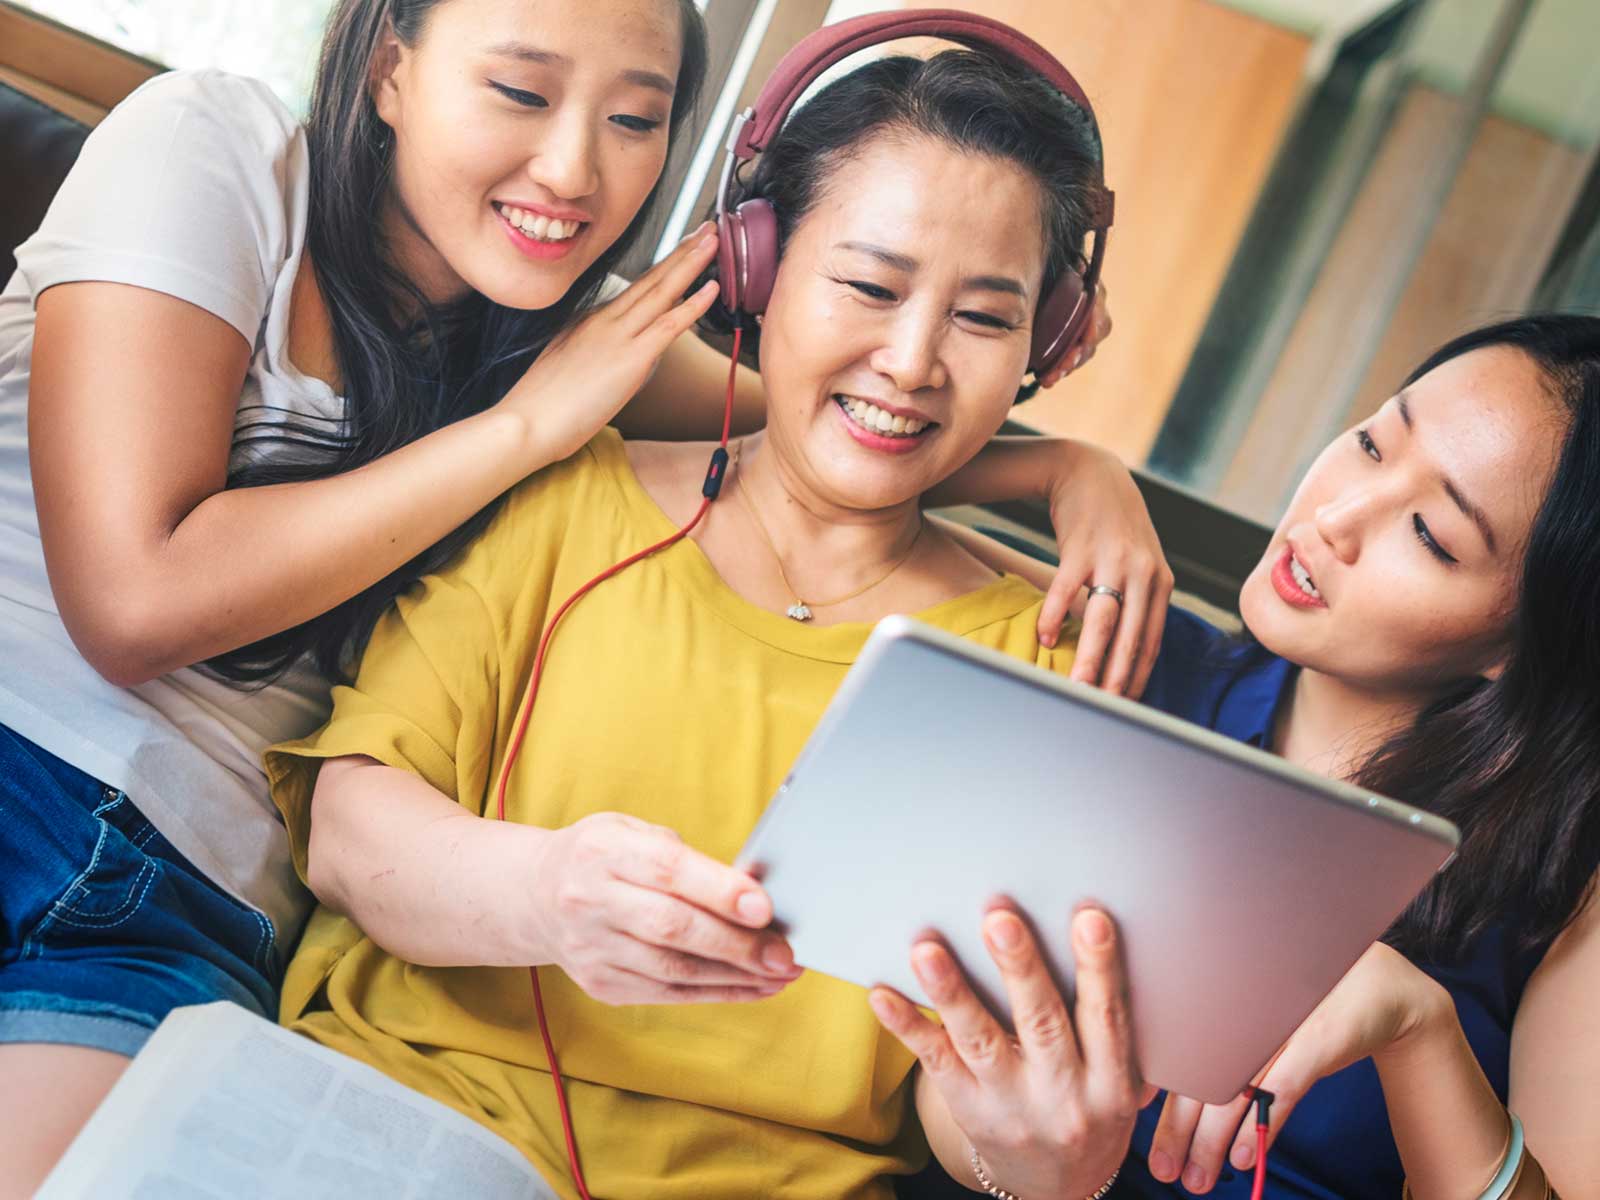 Stock photo of two Asian ladies helping an Asian aunt use an iPad wearing earphones.